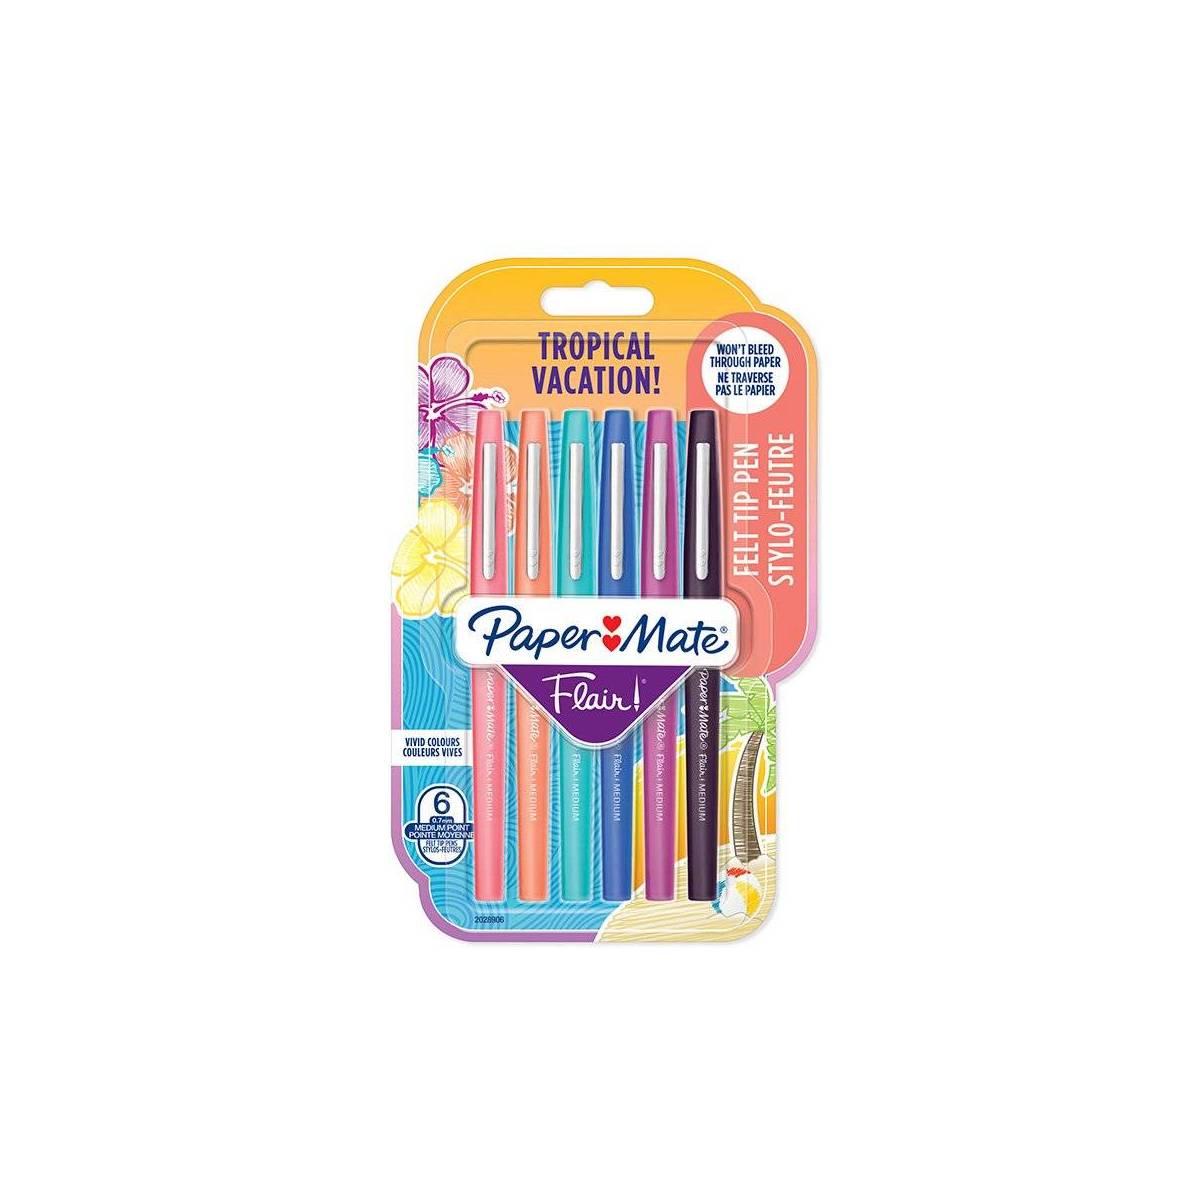 Stylo-Feutres Paper Mate Flair Tropical Vacation x6 - Pointe Moyenne 0.7 mm